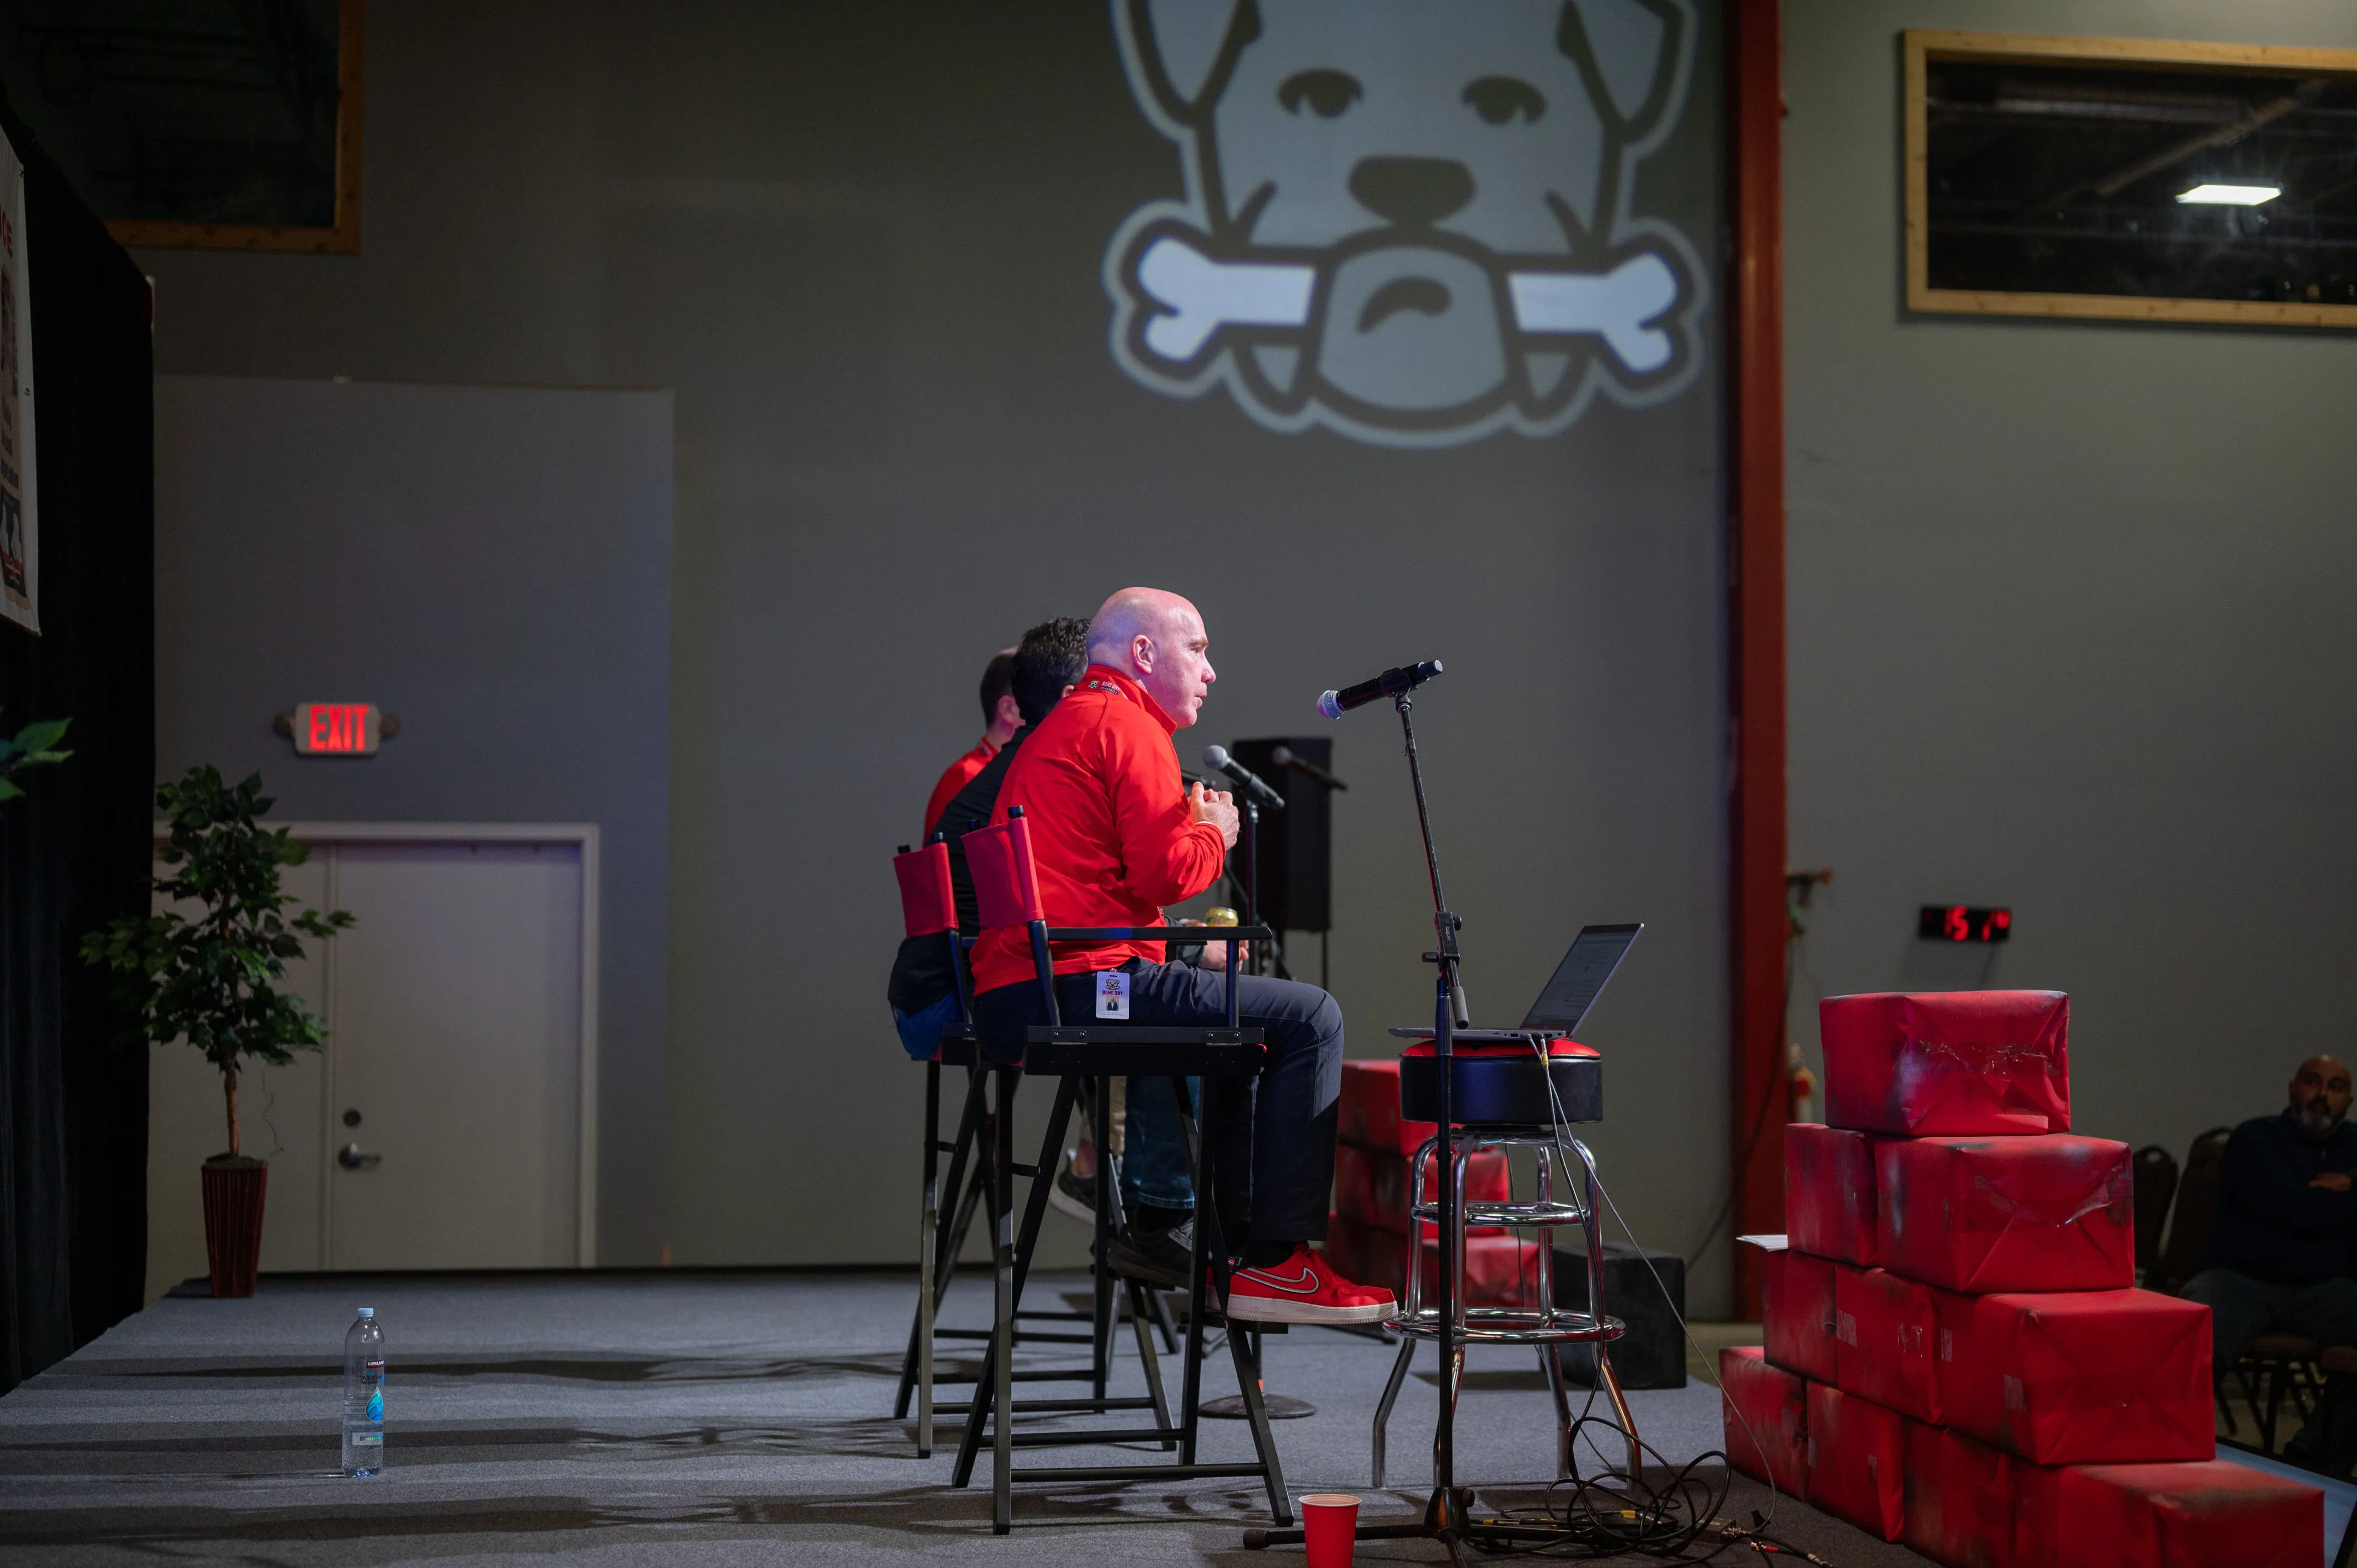 Person performing music on stage with a dog illustration in the background.